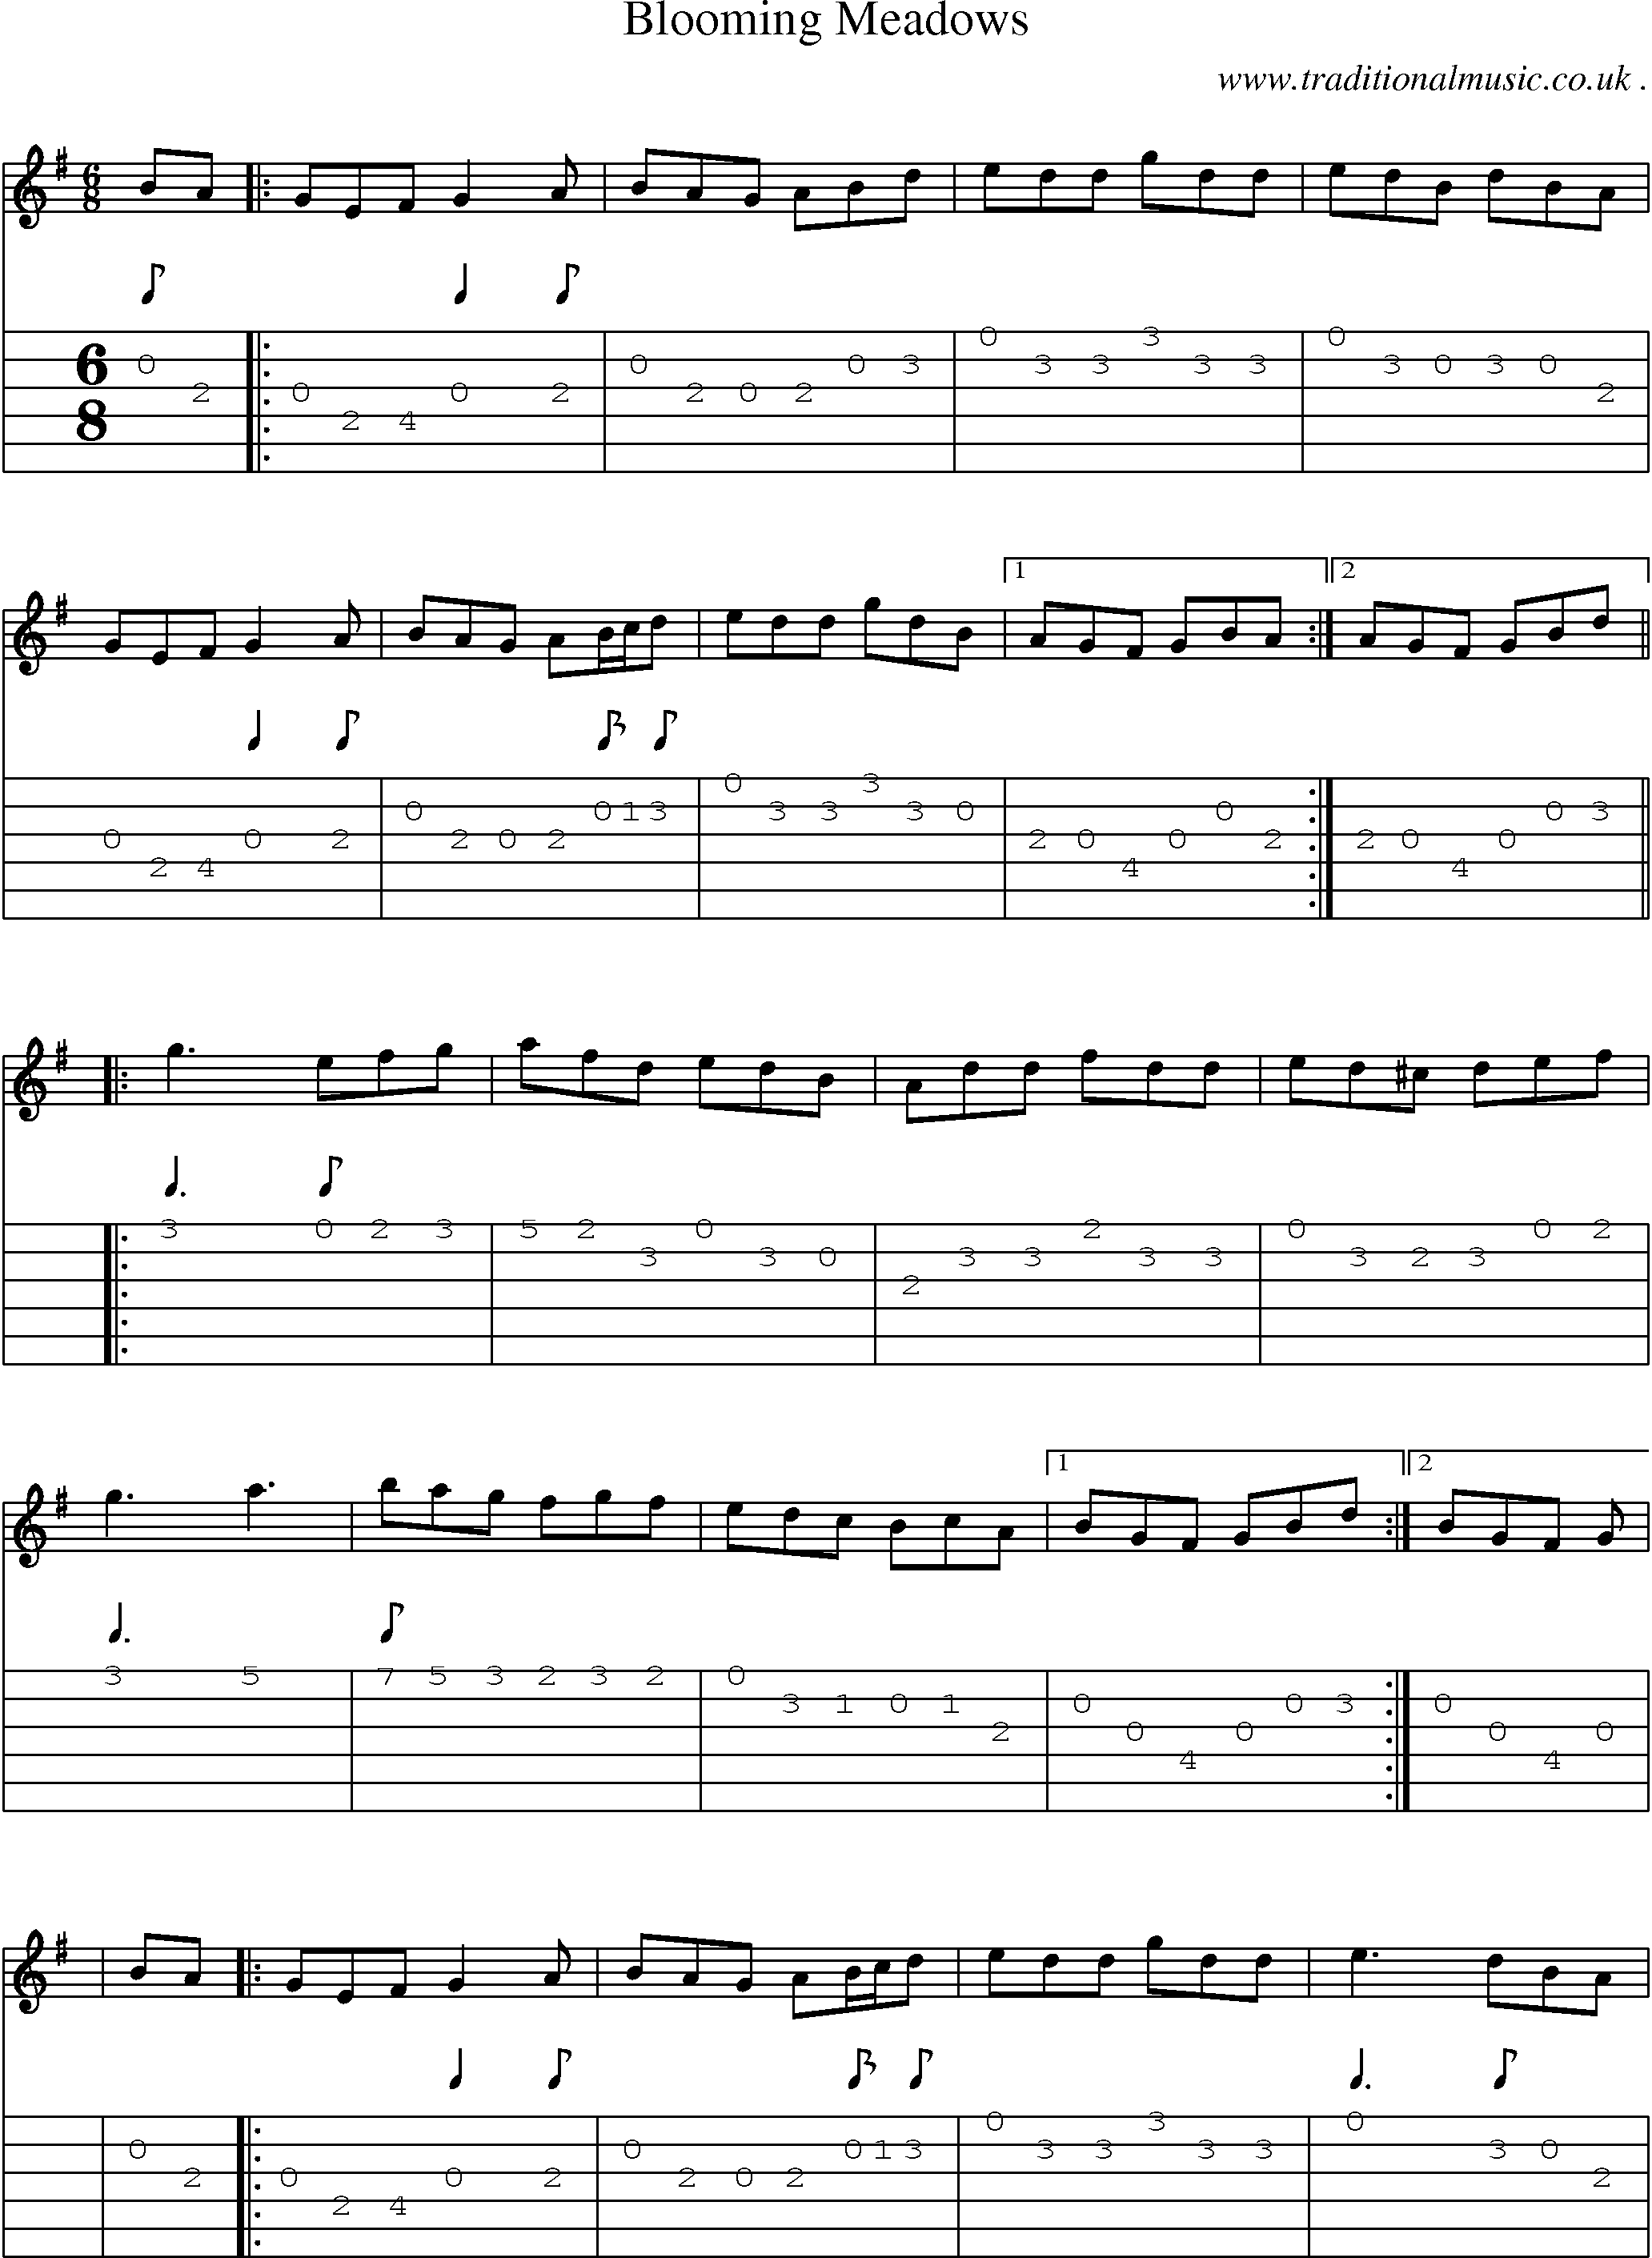 Sheet-Music and Guitar Tabs for Blooming Meadows